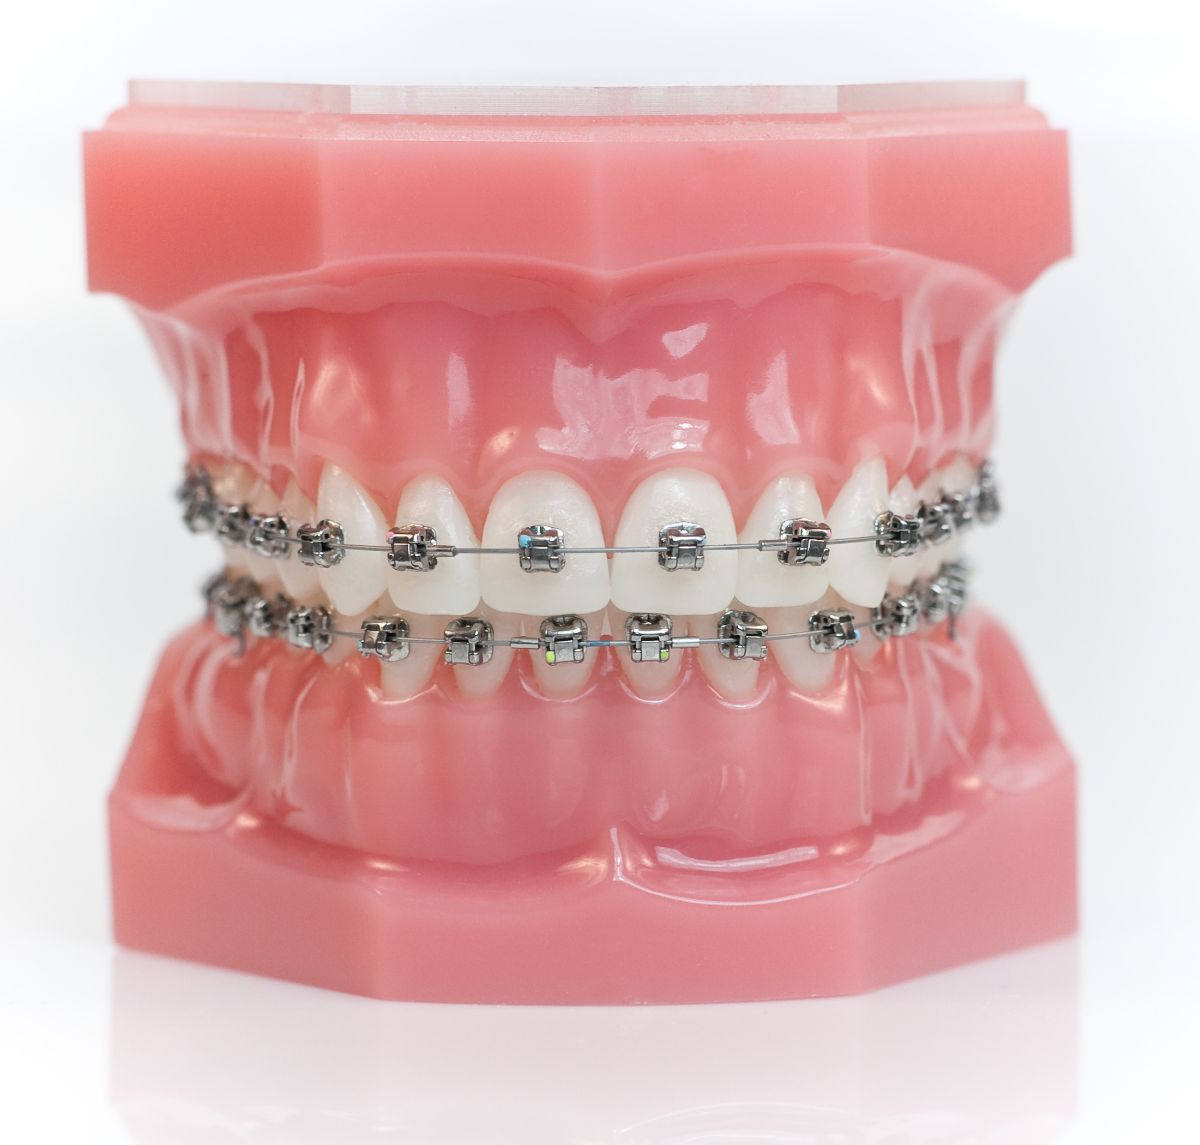 The Benefits of Damon Clear and Metal Braces